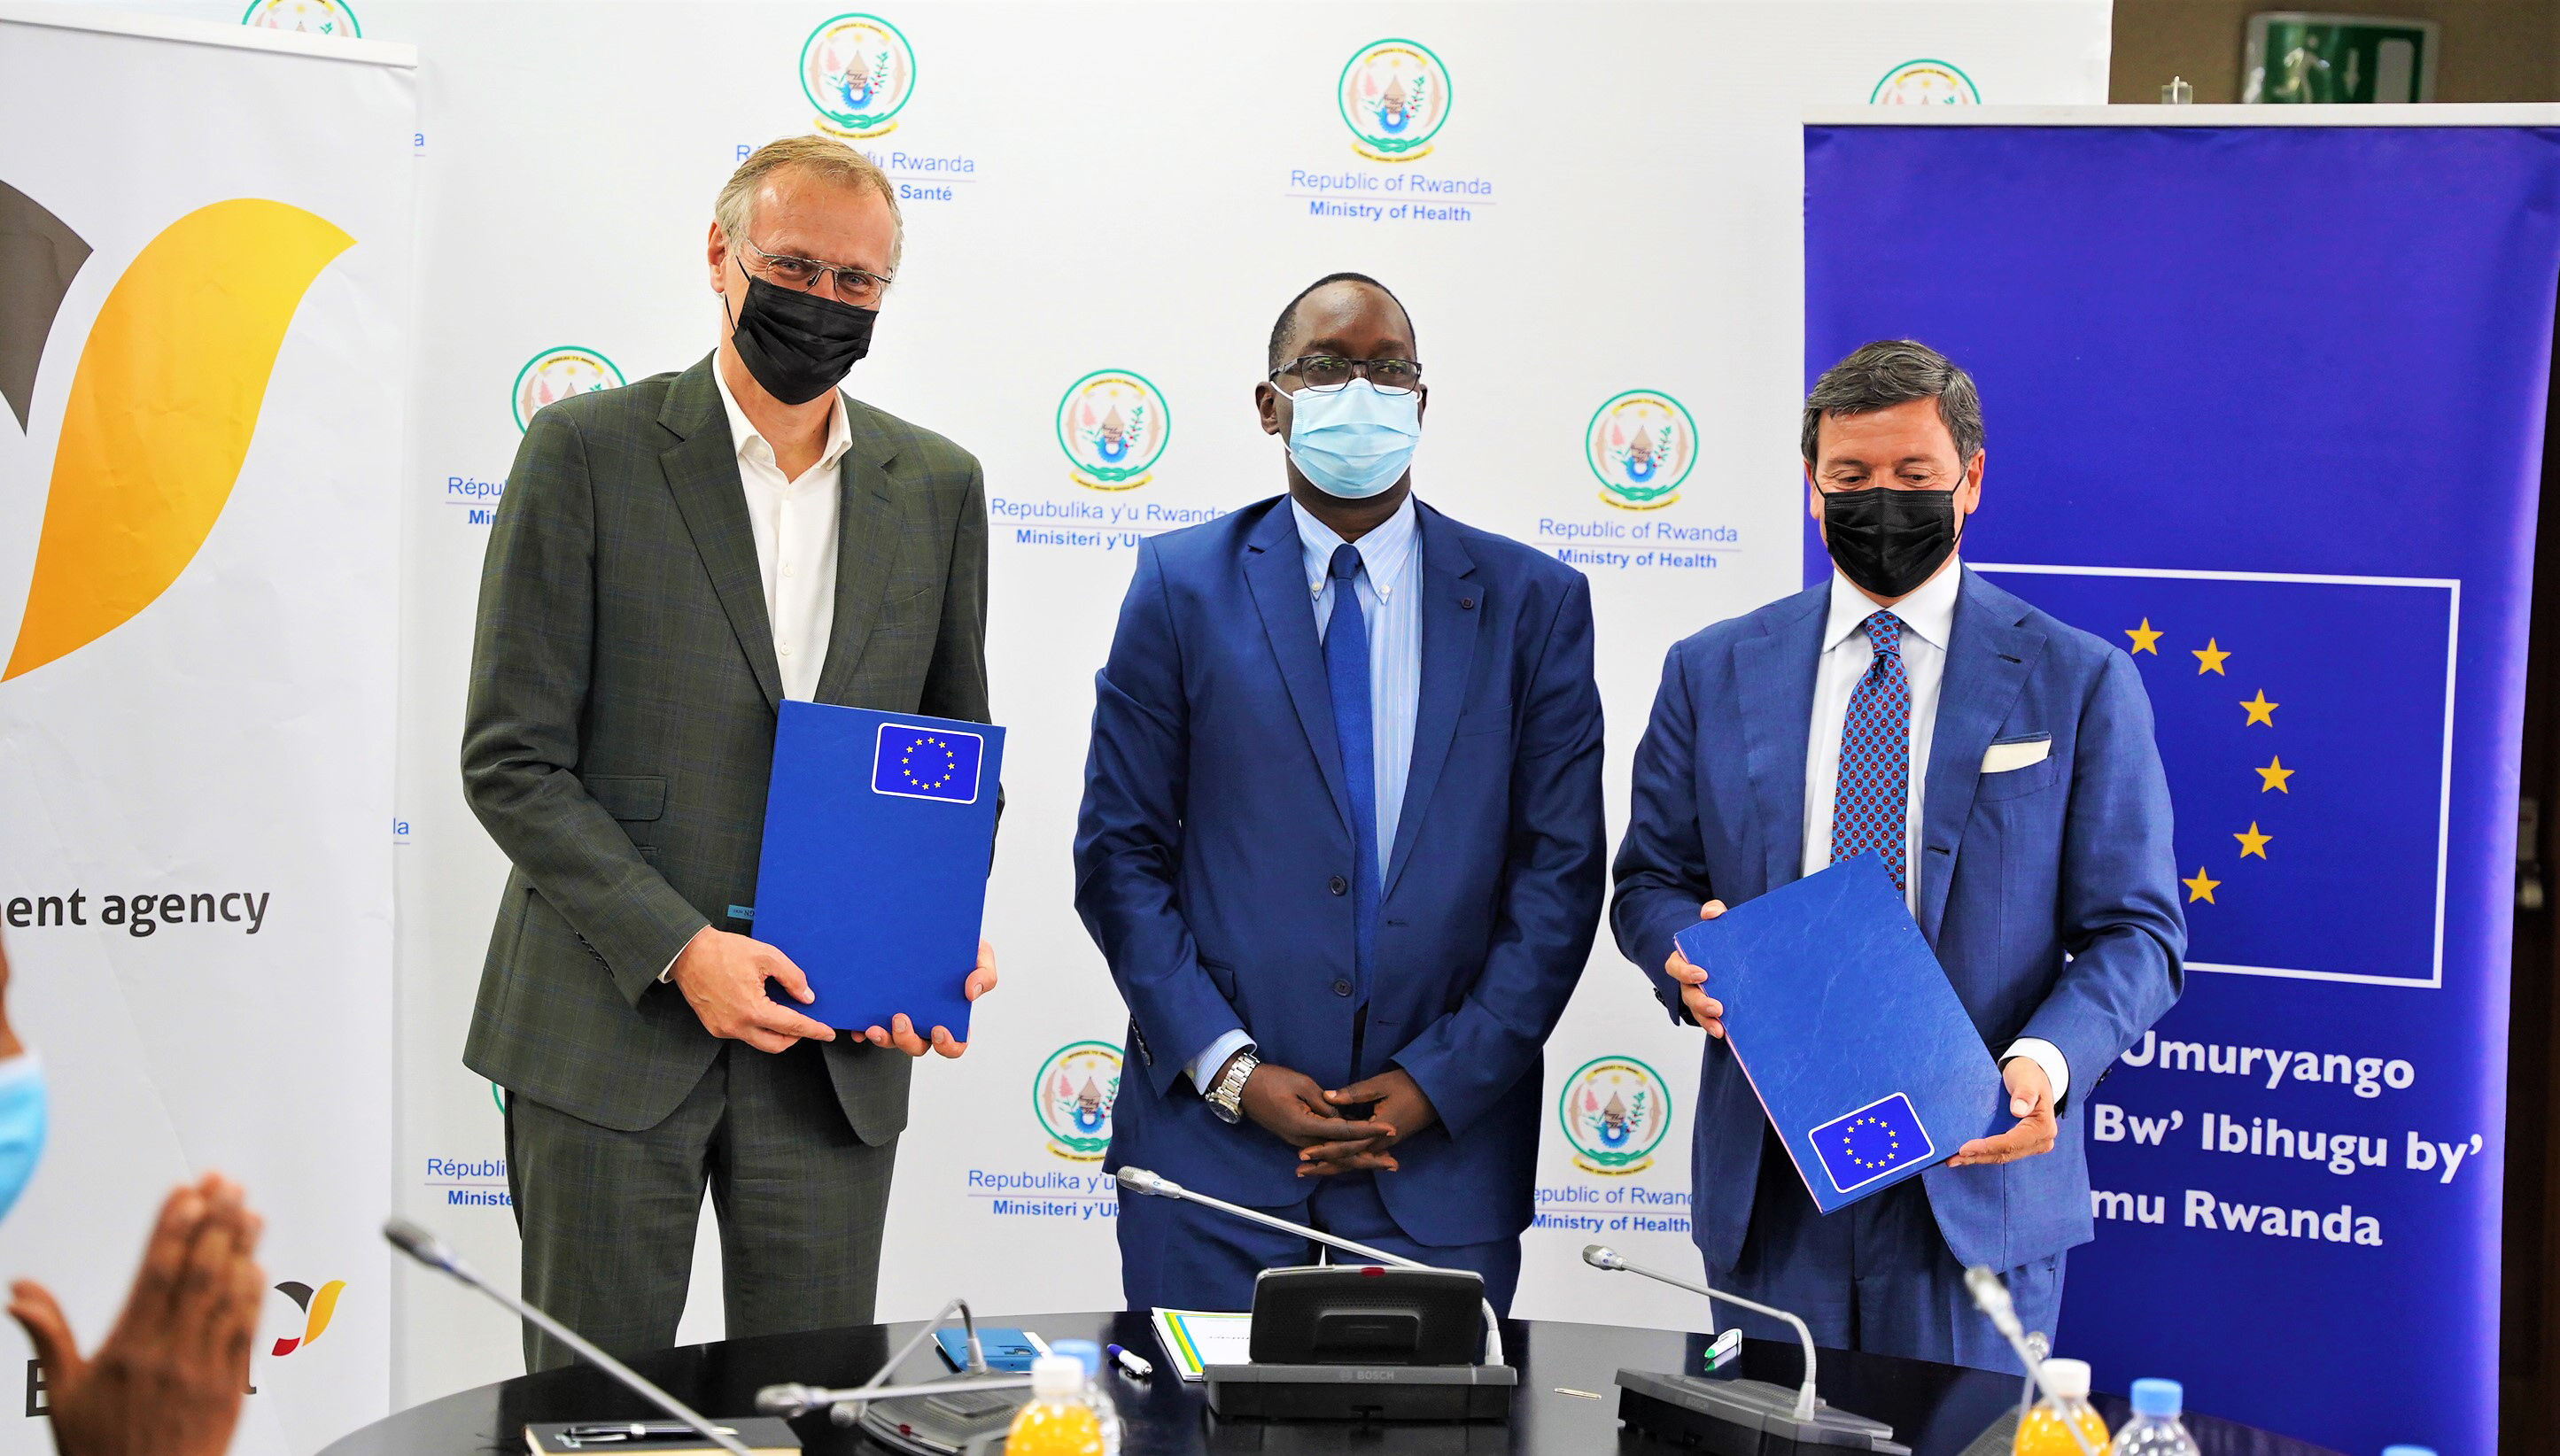 Dirk Deprez Enabel Resident Representative,  Dr Daniel Ngamije, the Minister of Health and   EU envoy to Rwanda, Nicola Bellomo during the signing ceremony of the agreement in Kigali on May 6. All Photos by Craish Bahizi